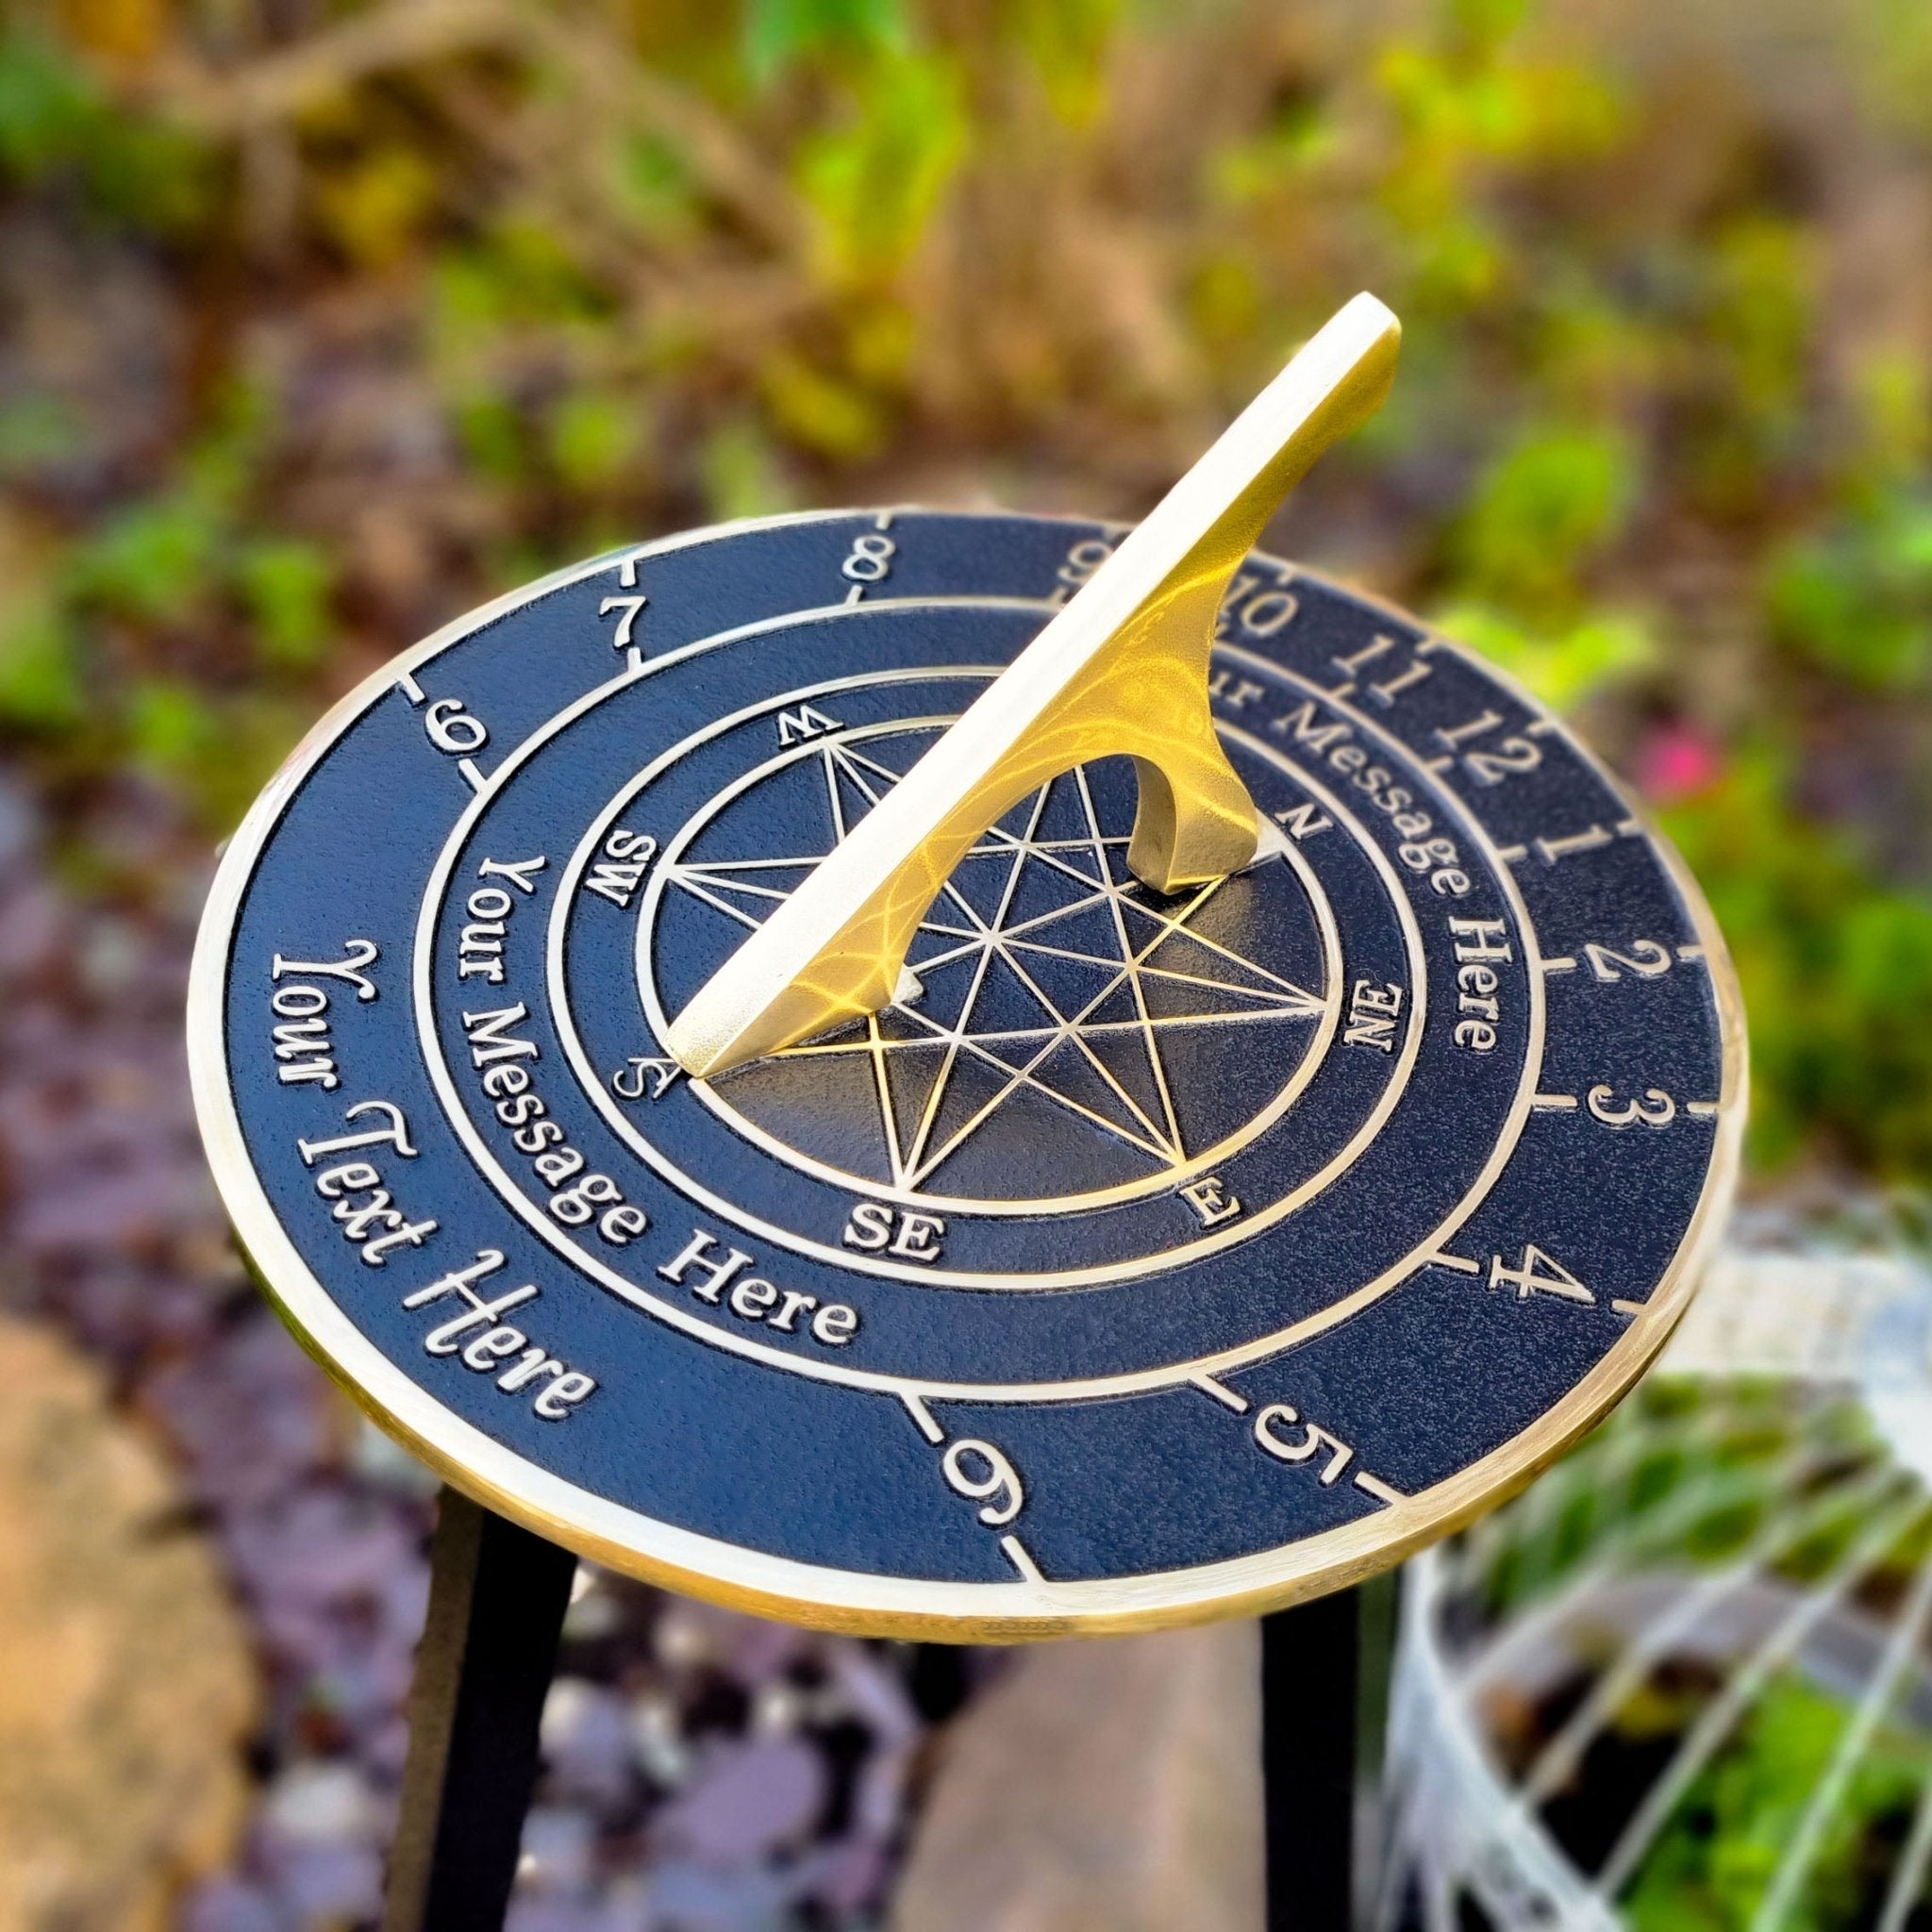 Large Custom Sundial With Star Image - The Metal Foundry